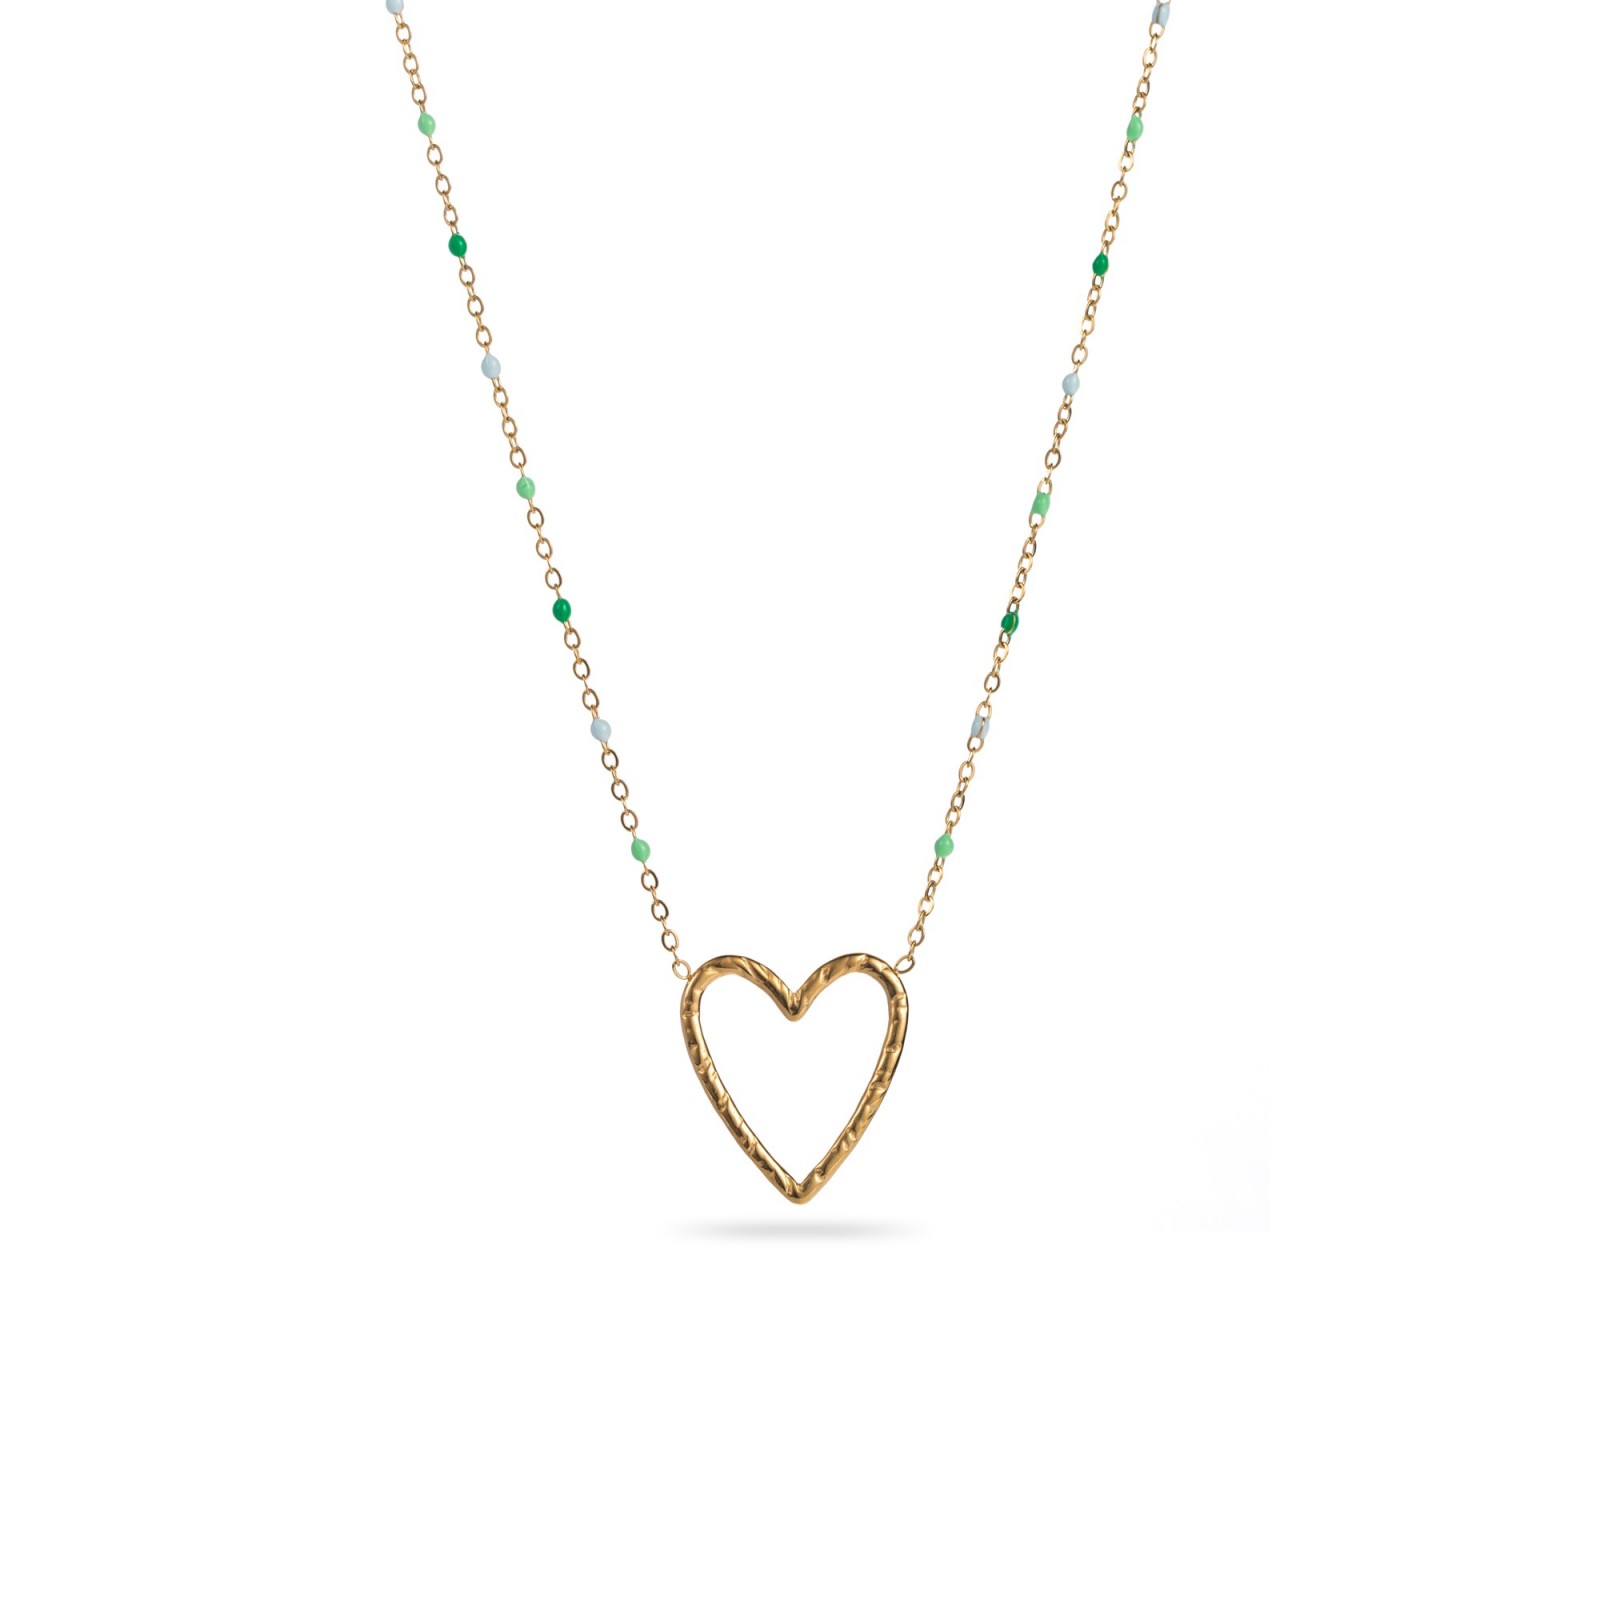 Scratched Heart Necklace with Pearls Color:Multi-Green